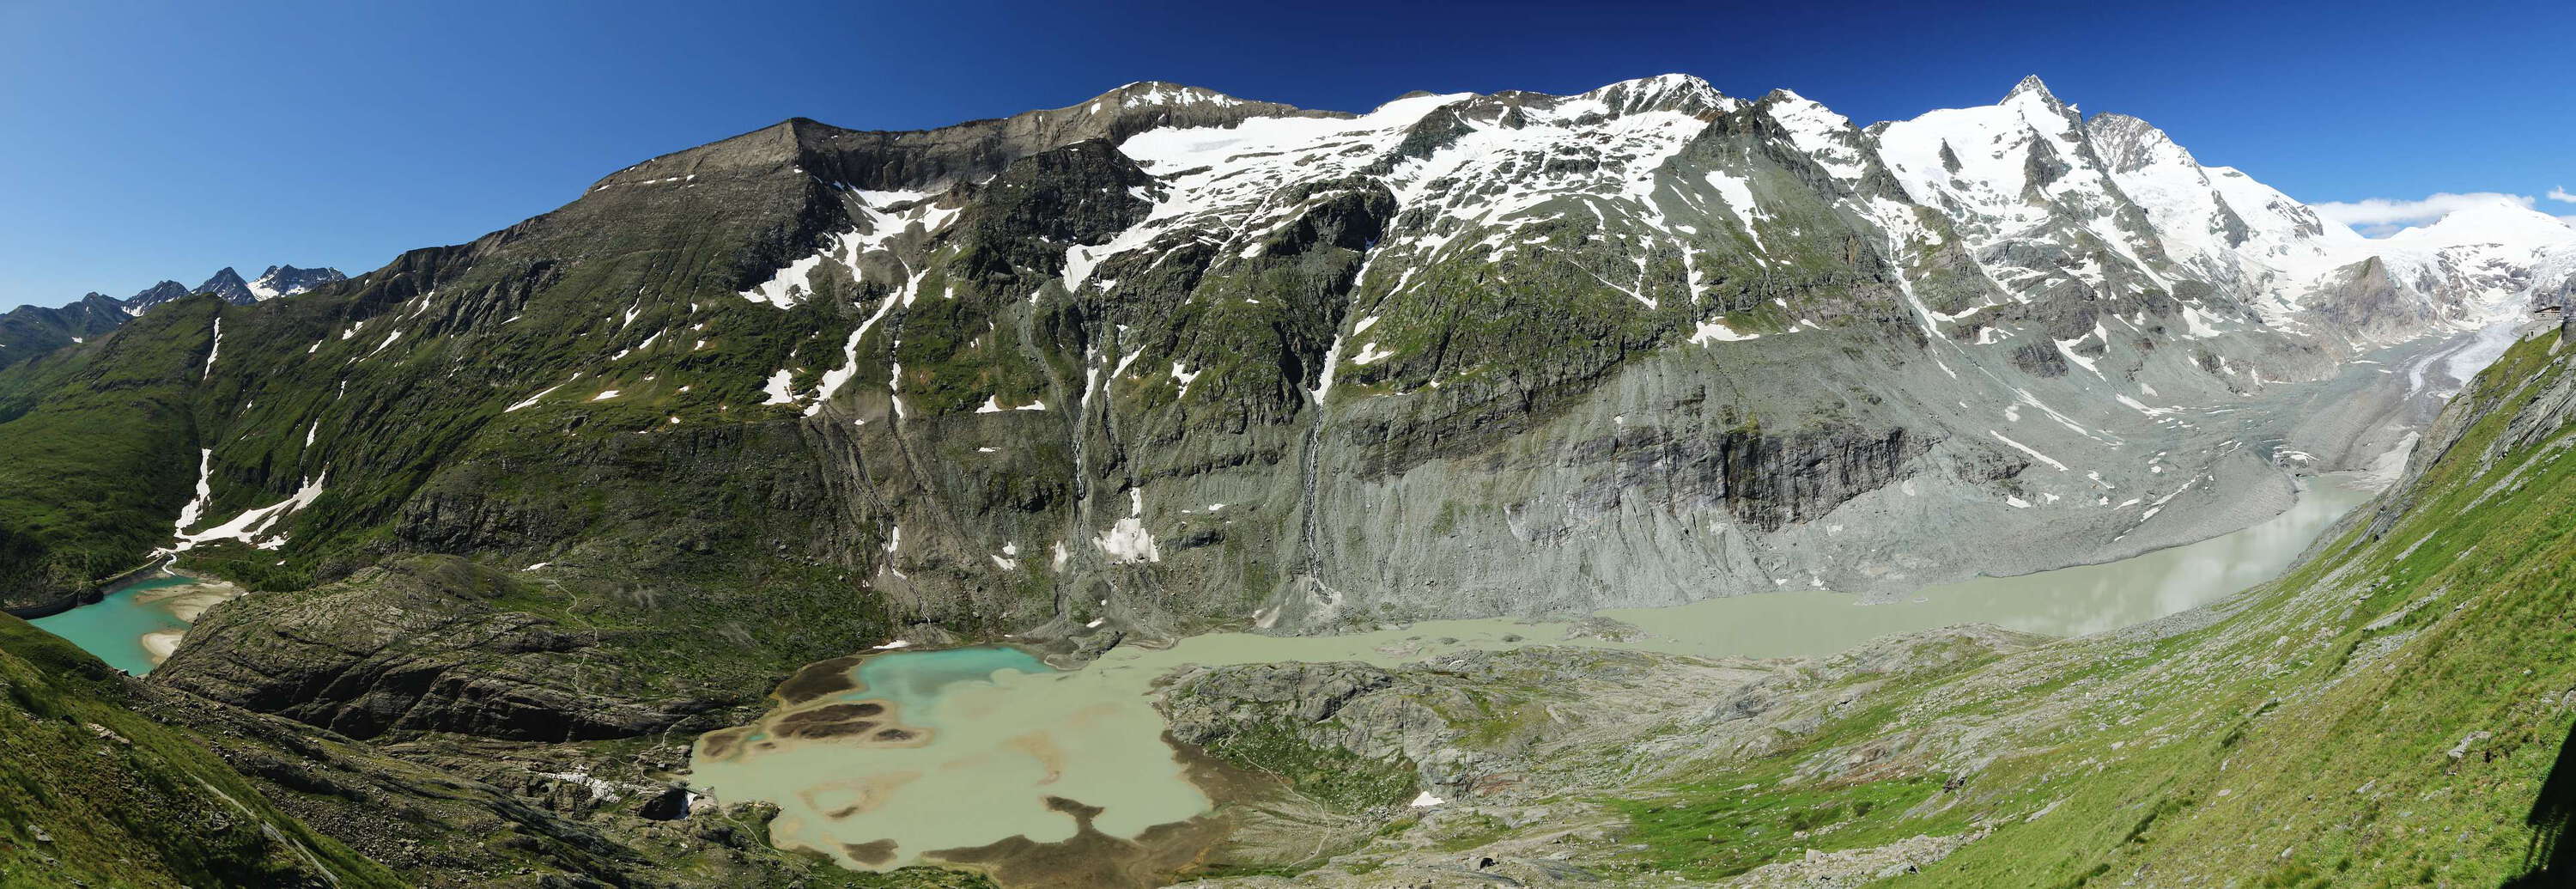 Glocknergruppe with Pasterze and proglacial lake